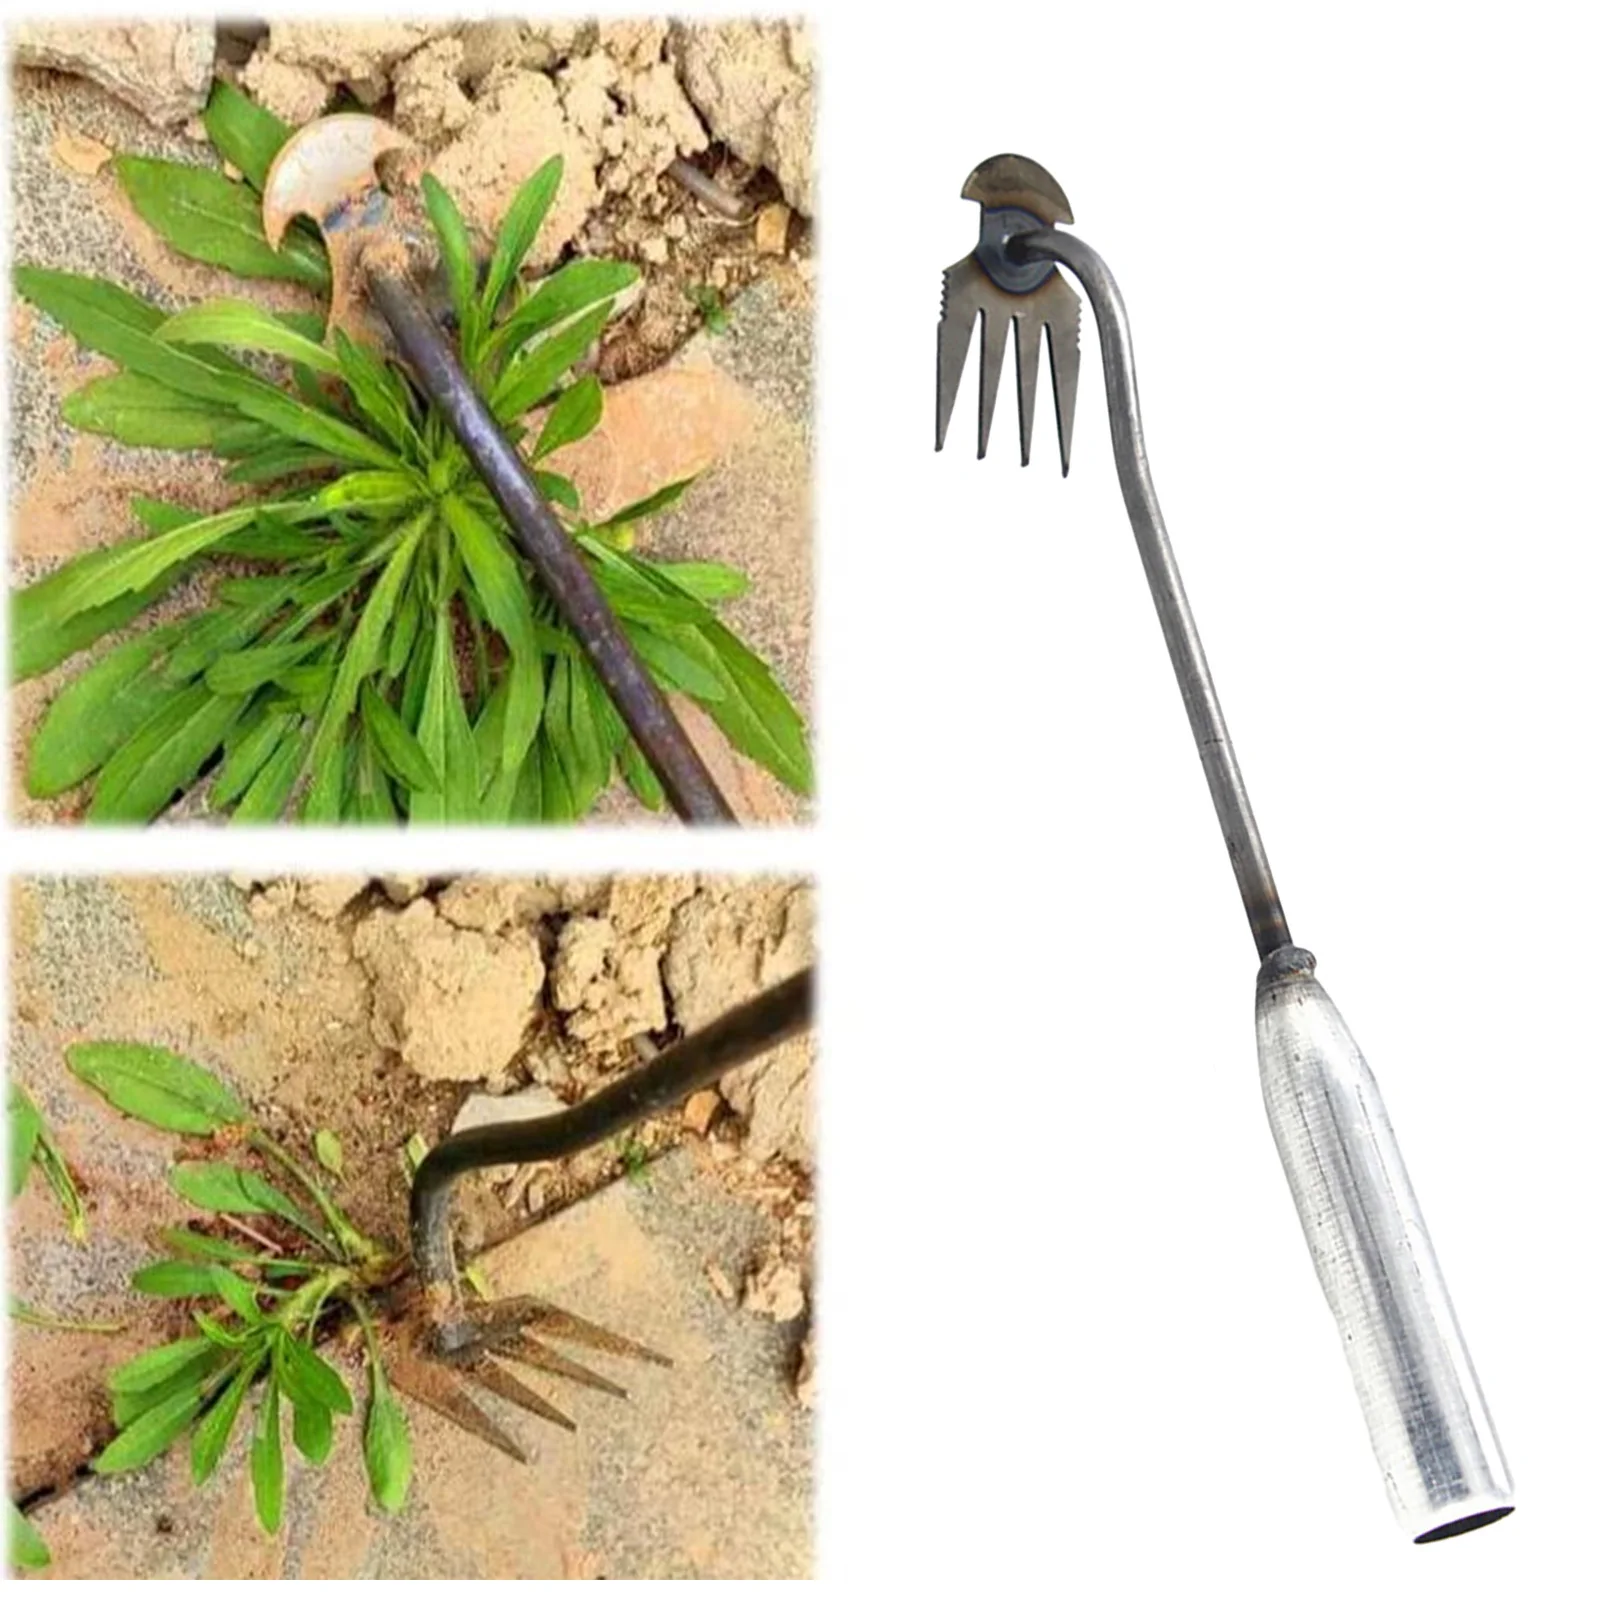 

Foot-operated Weeder Root Remover Tool Four-tooth Weeder Weeding Artifact Uprooting Weeding Tool Rubber Handle Garden Tools